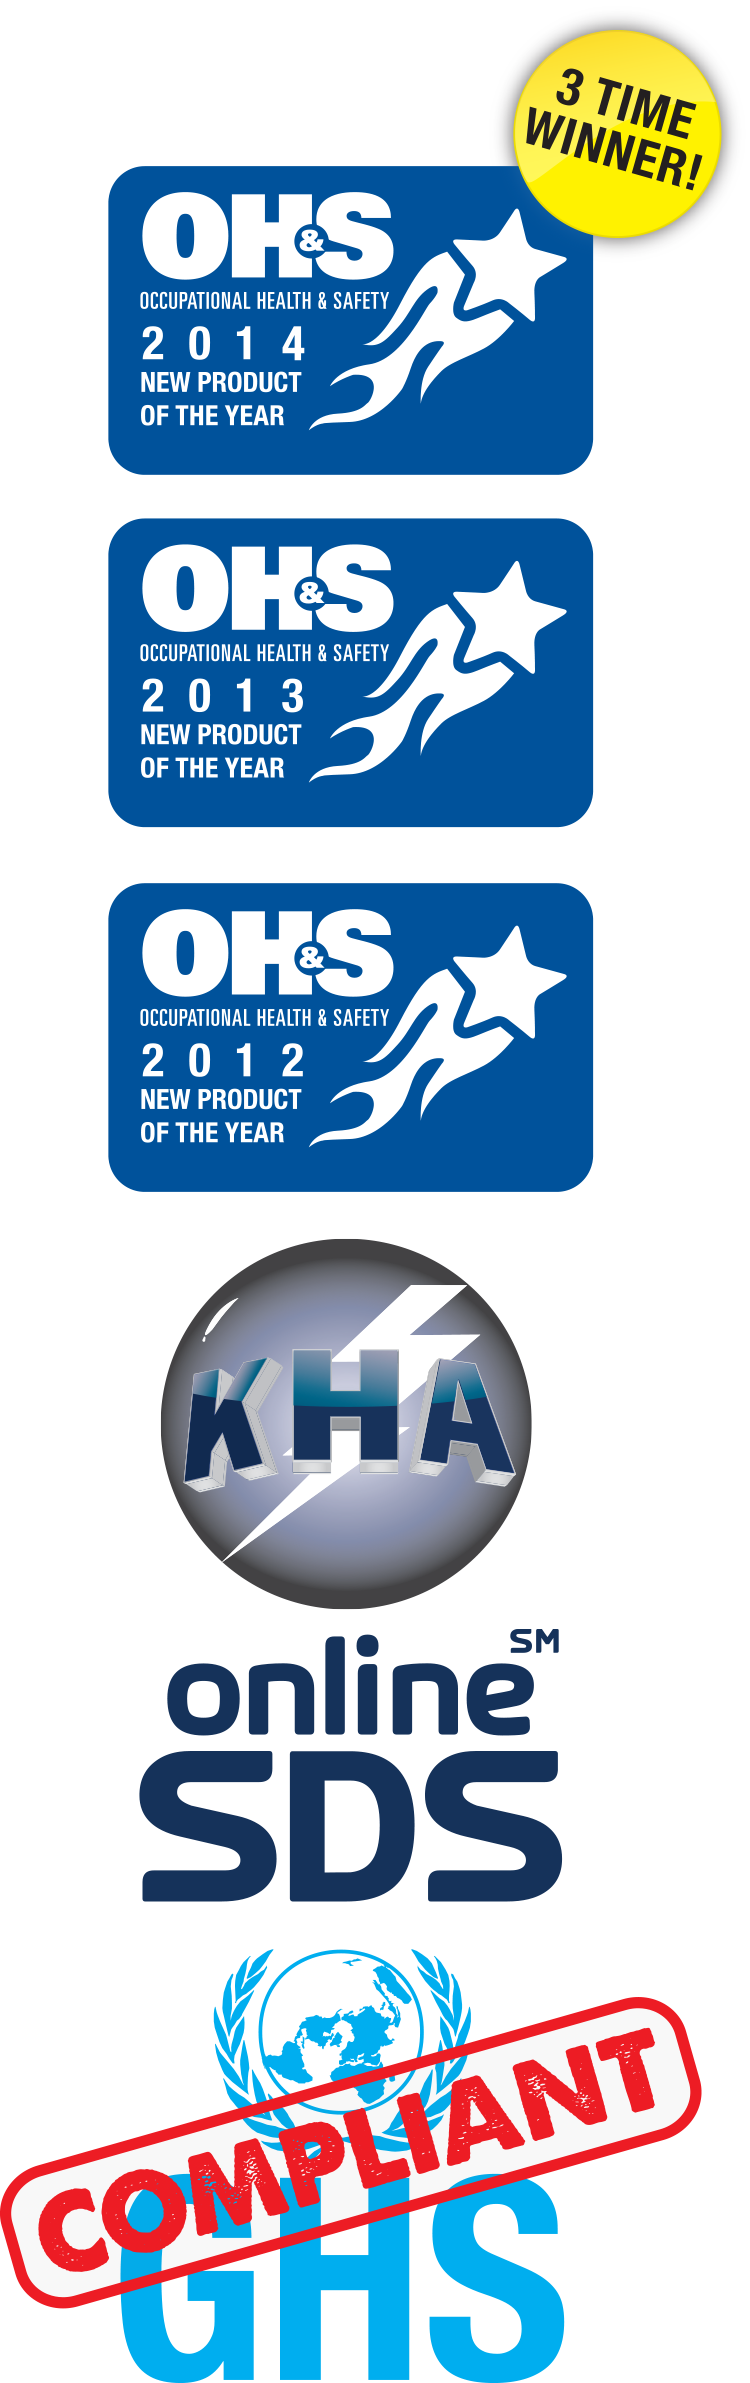 KHA IS COMMITTED TO SUPPORTING U.S. AND CANADIAN EMPLOYERS MEET GHS OBLIGATIONS REQUIRED BY REGULATORS.